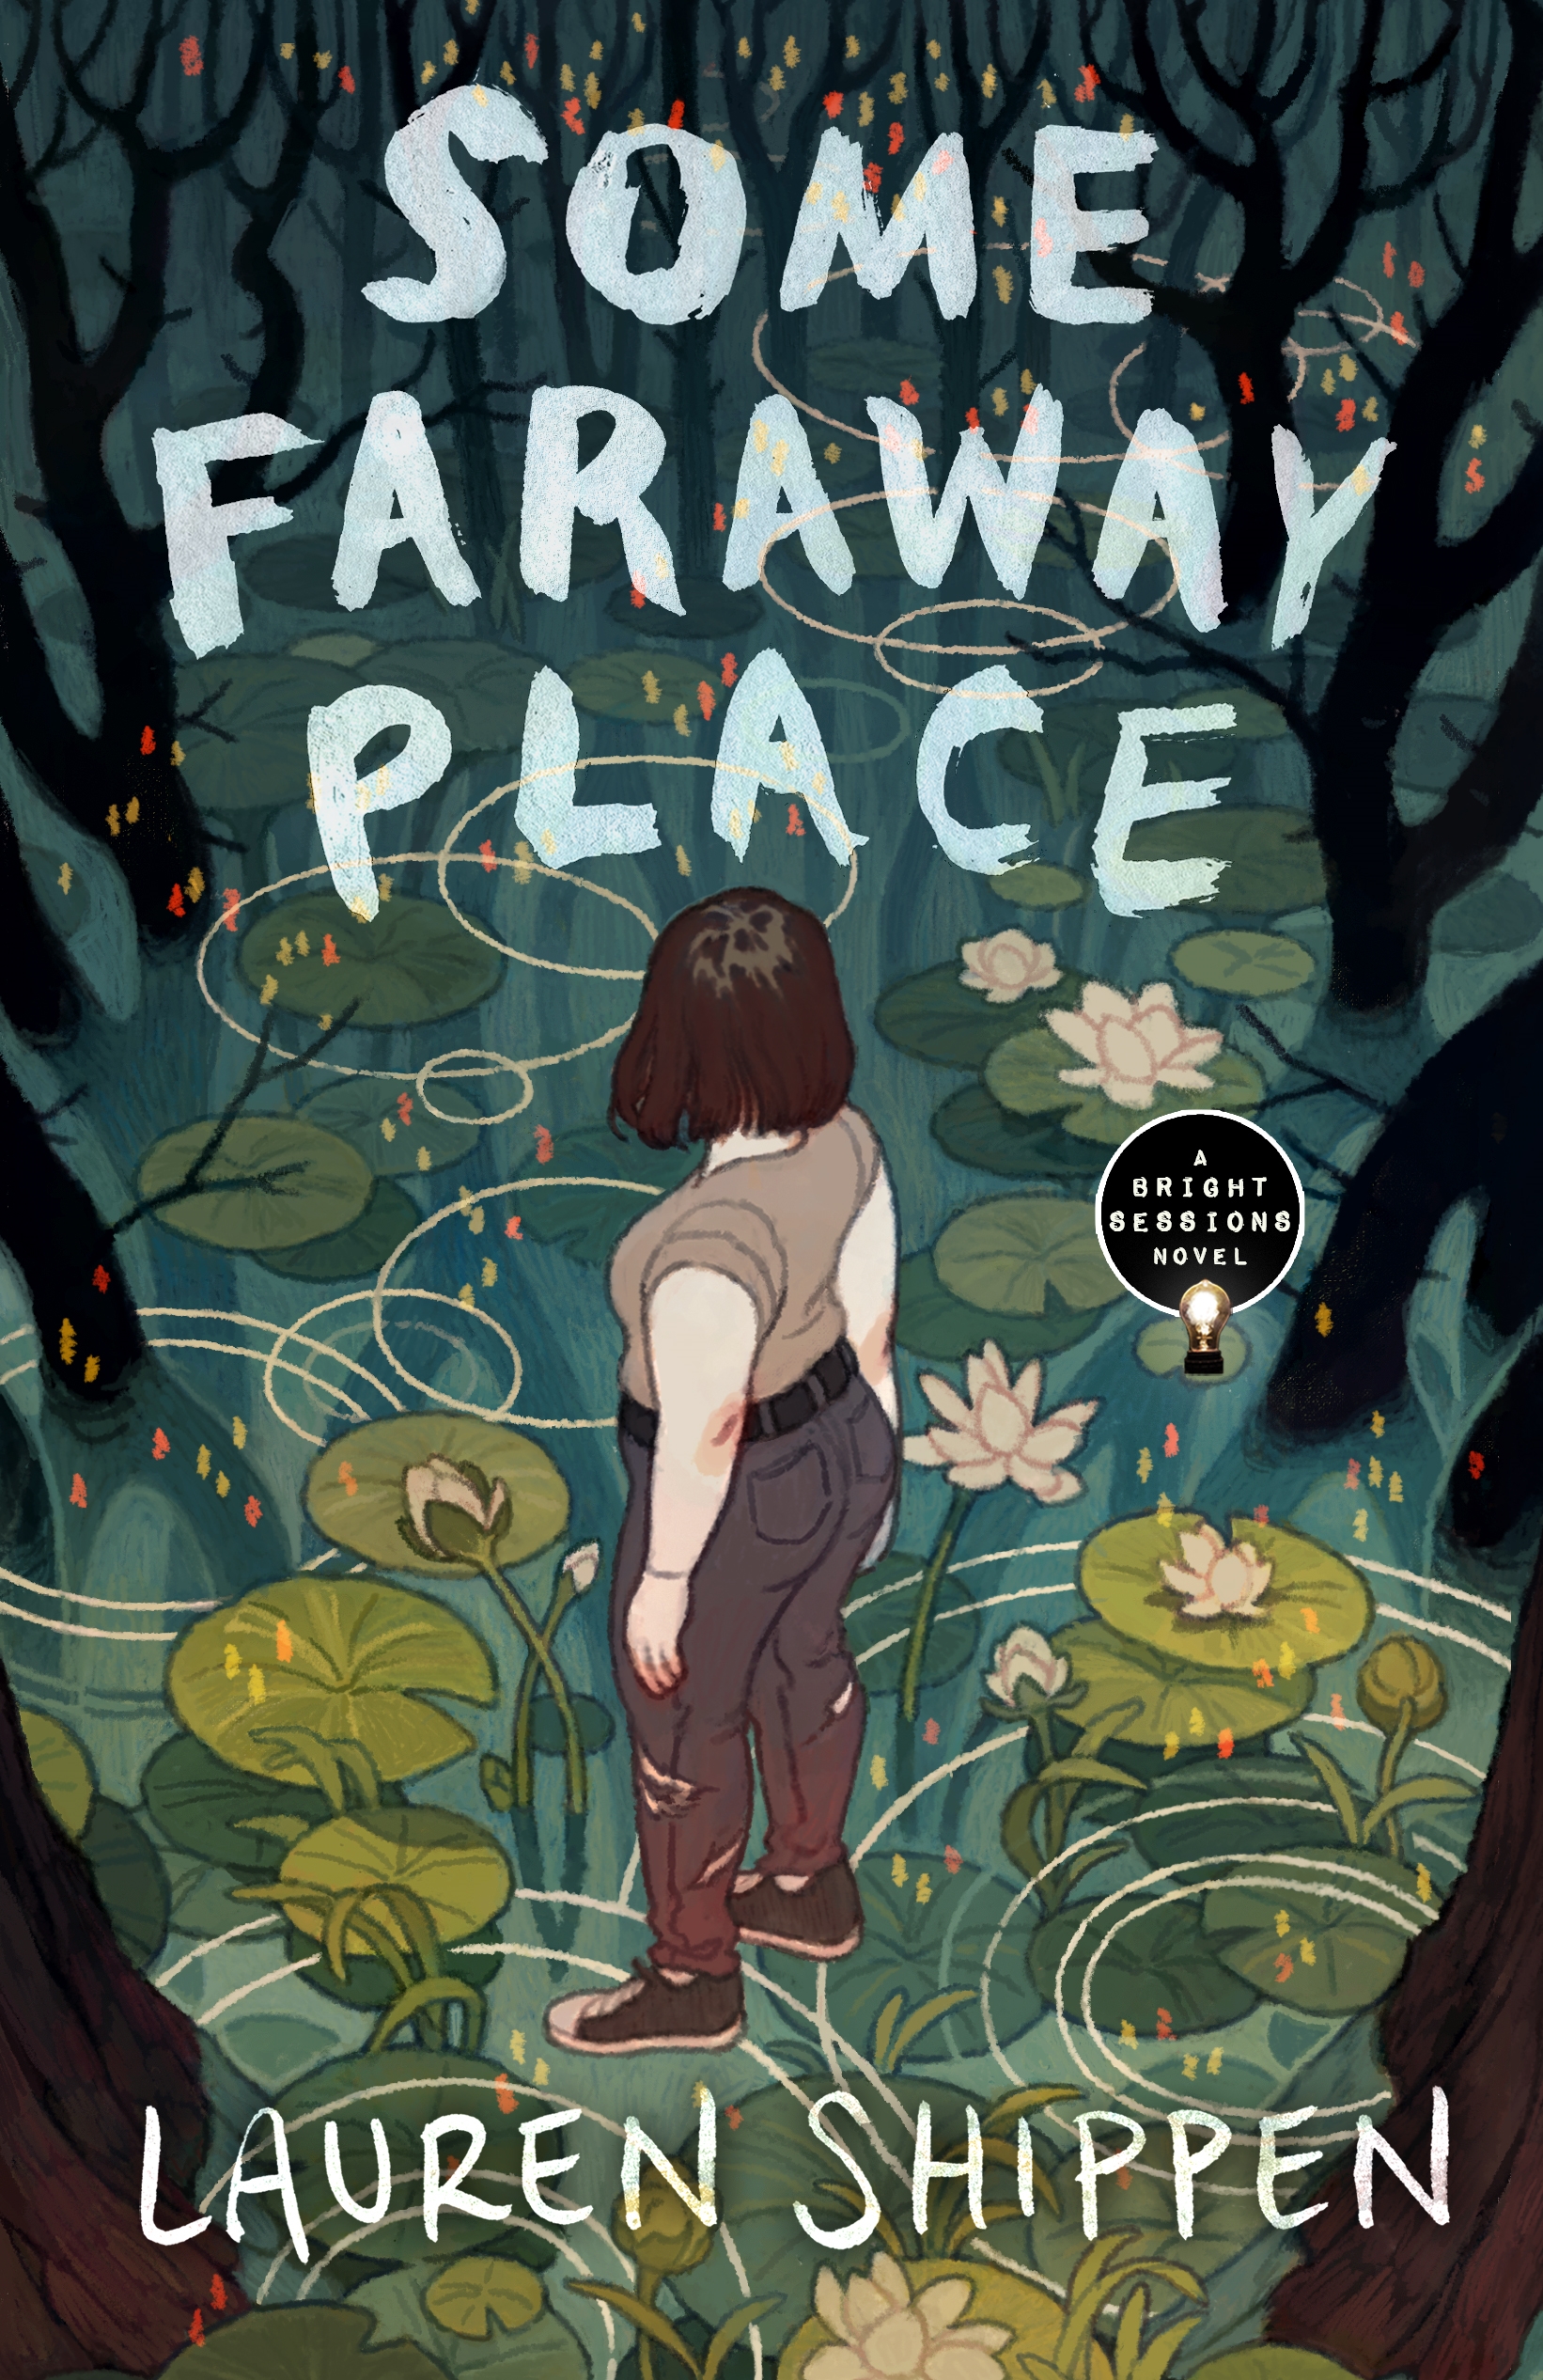 Some Faraway Place : A Bright Sessions Novel by Lauren Shippen